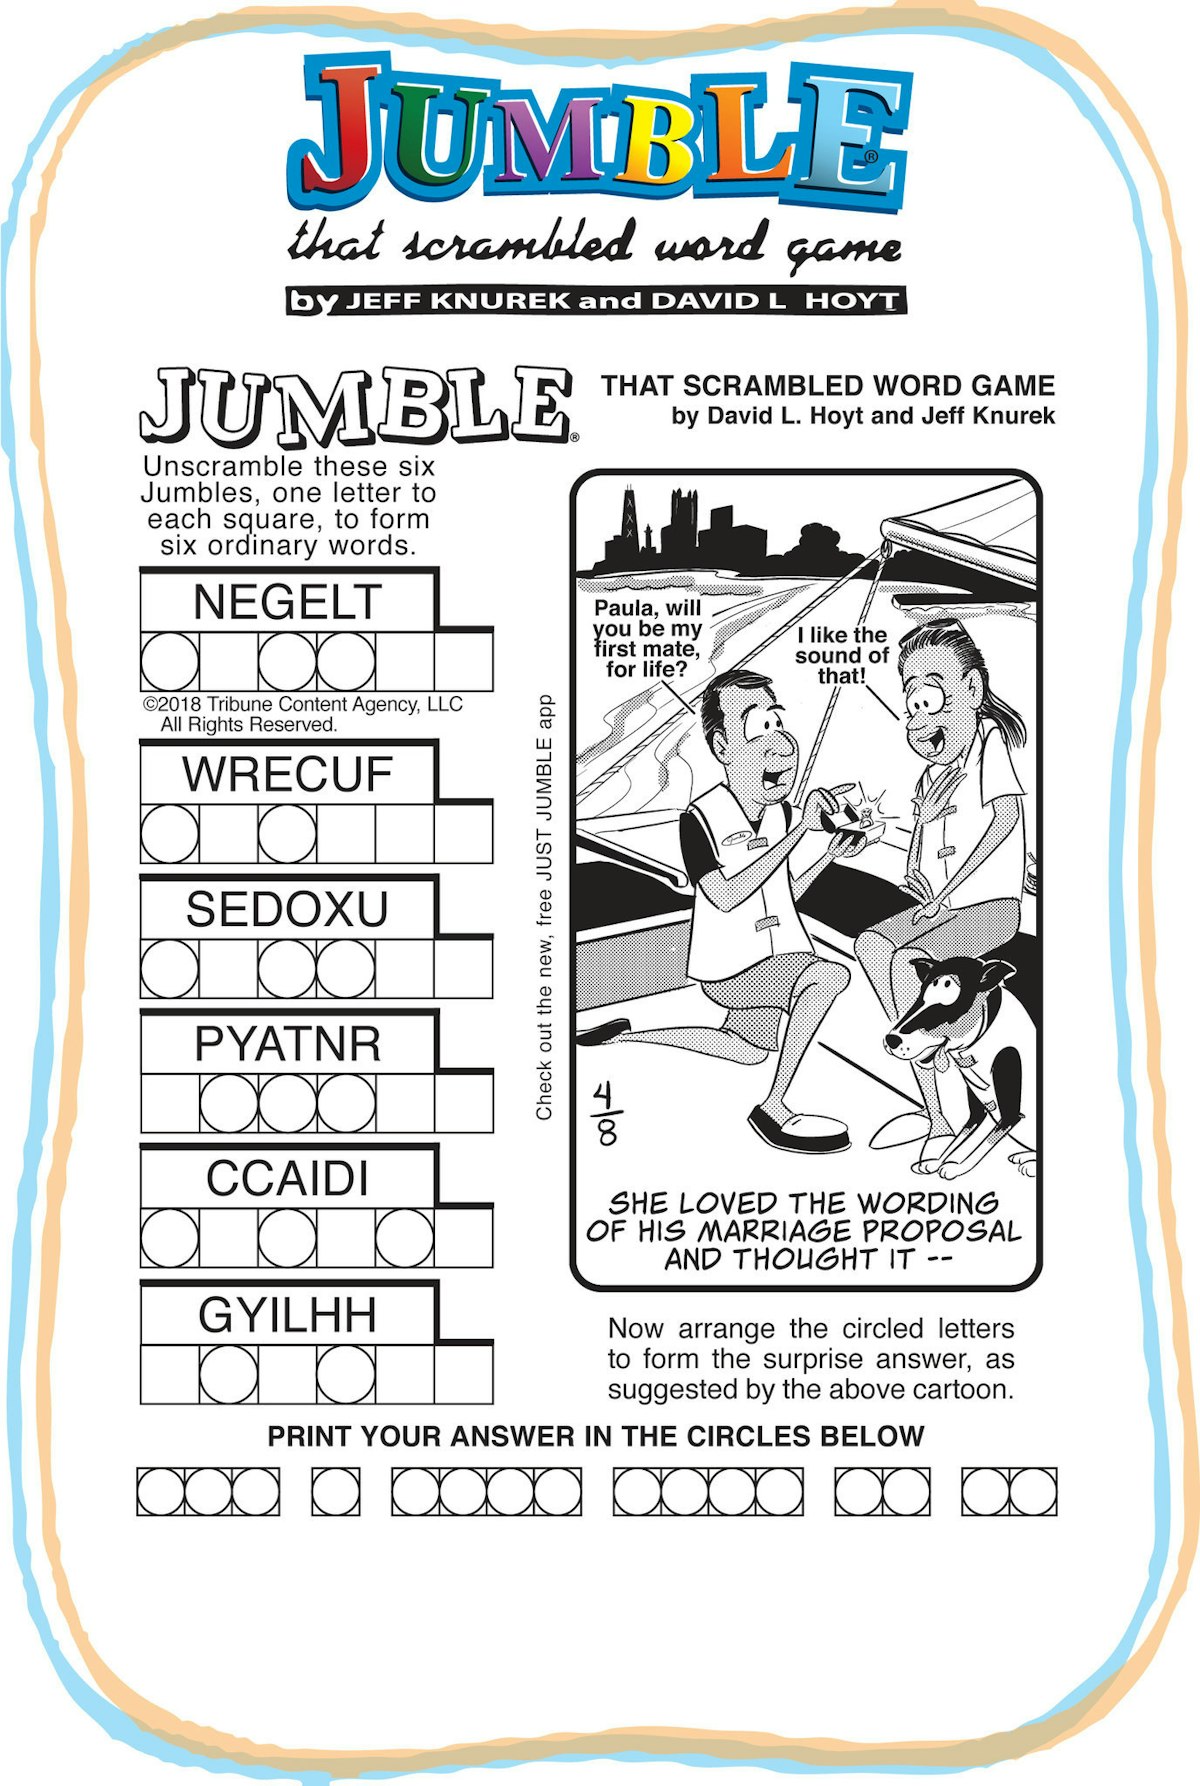 Jumble Daily, Free Online Game